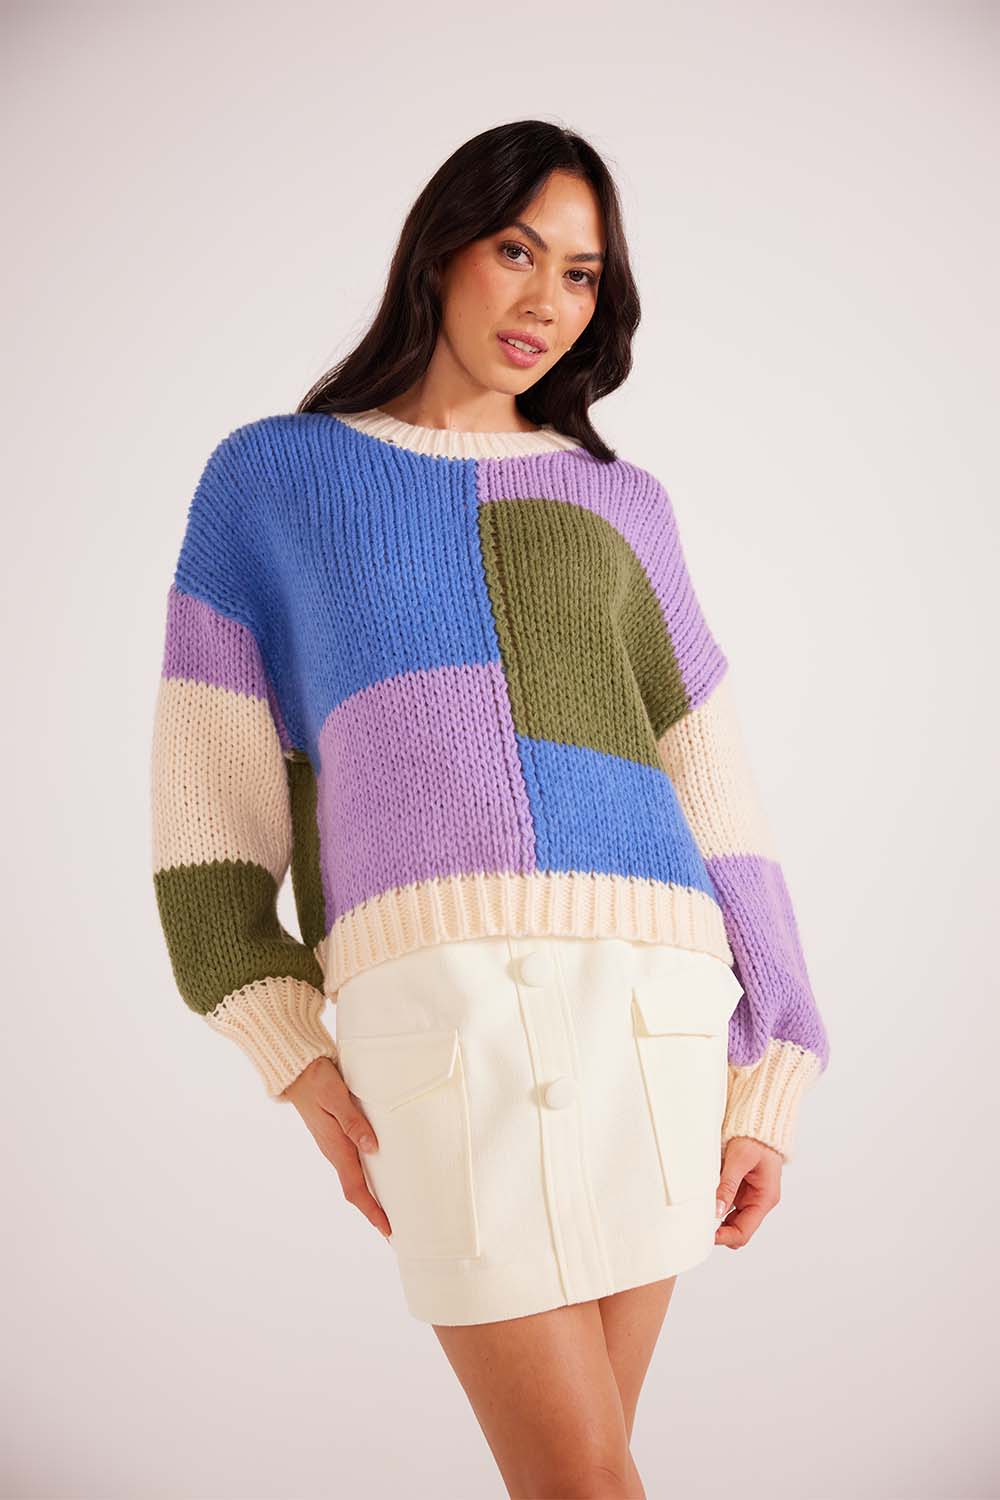 Mink Pink - Lawrence Knit Sweater - Multi Color Block